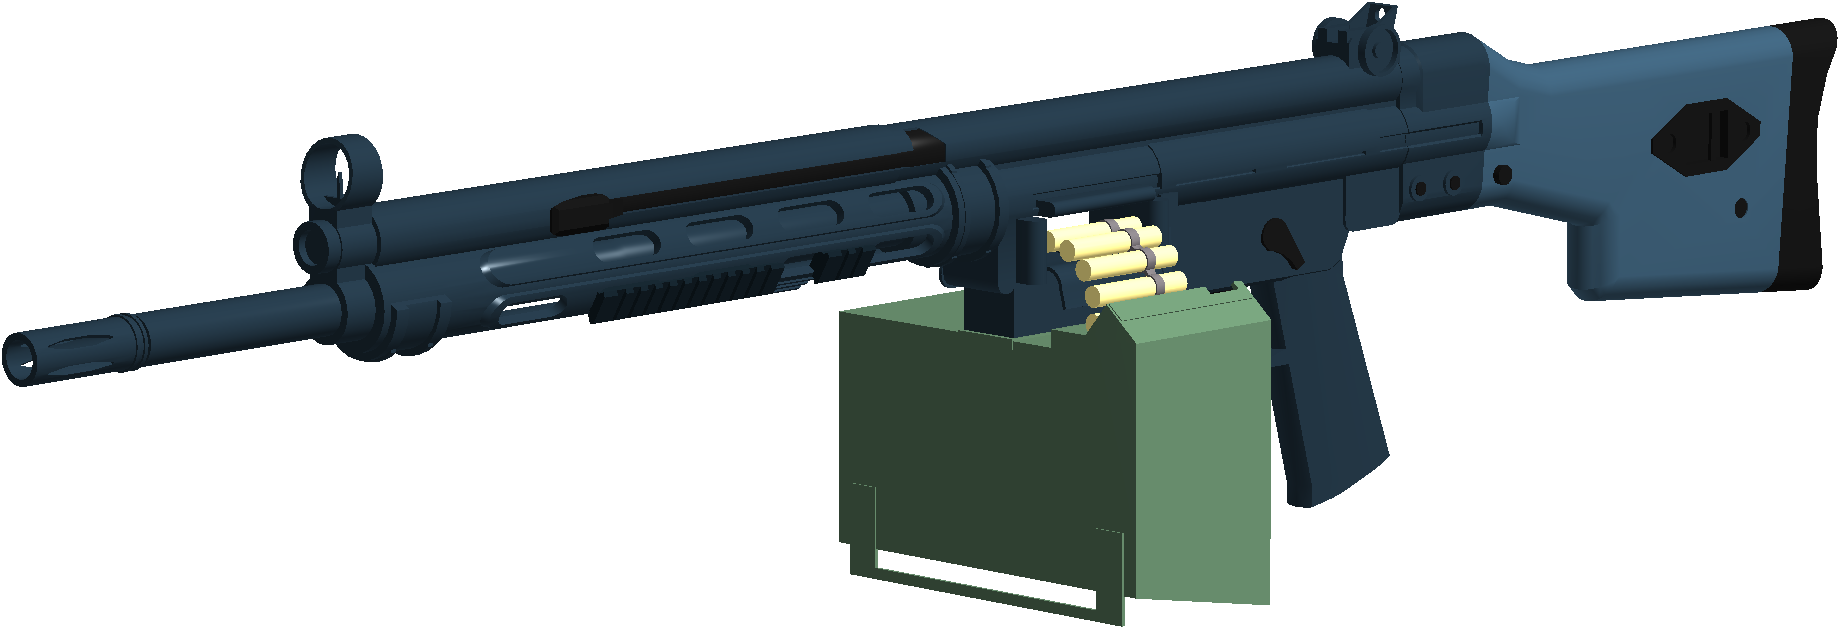 Hk21 Phantom Forces Wiki Fandom - how to get phantom forces guns in your roblox game